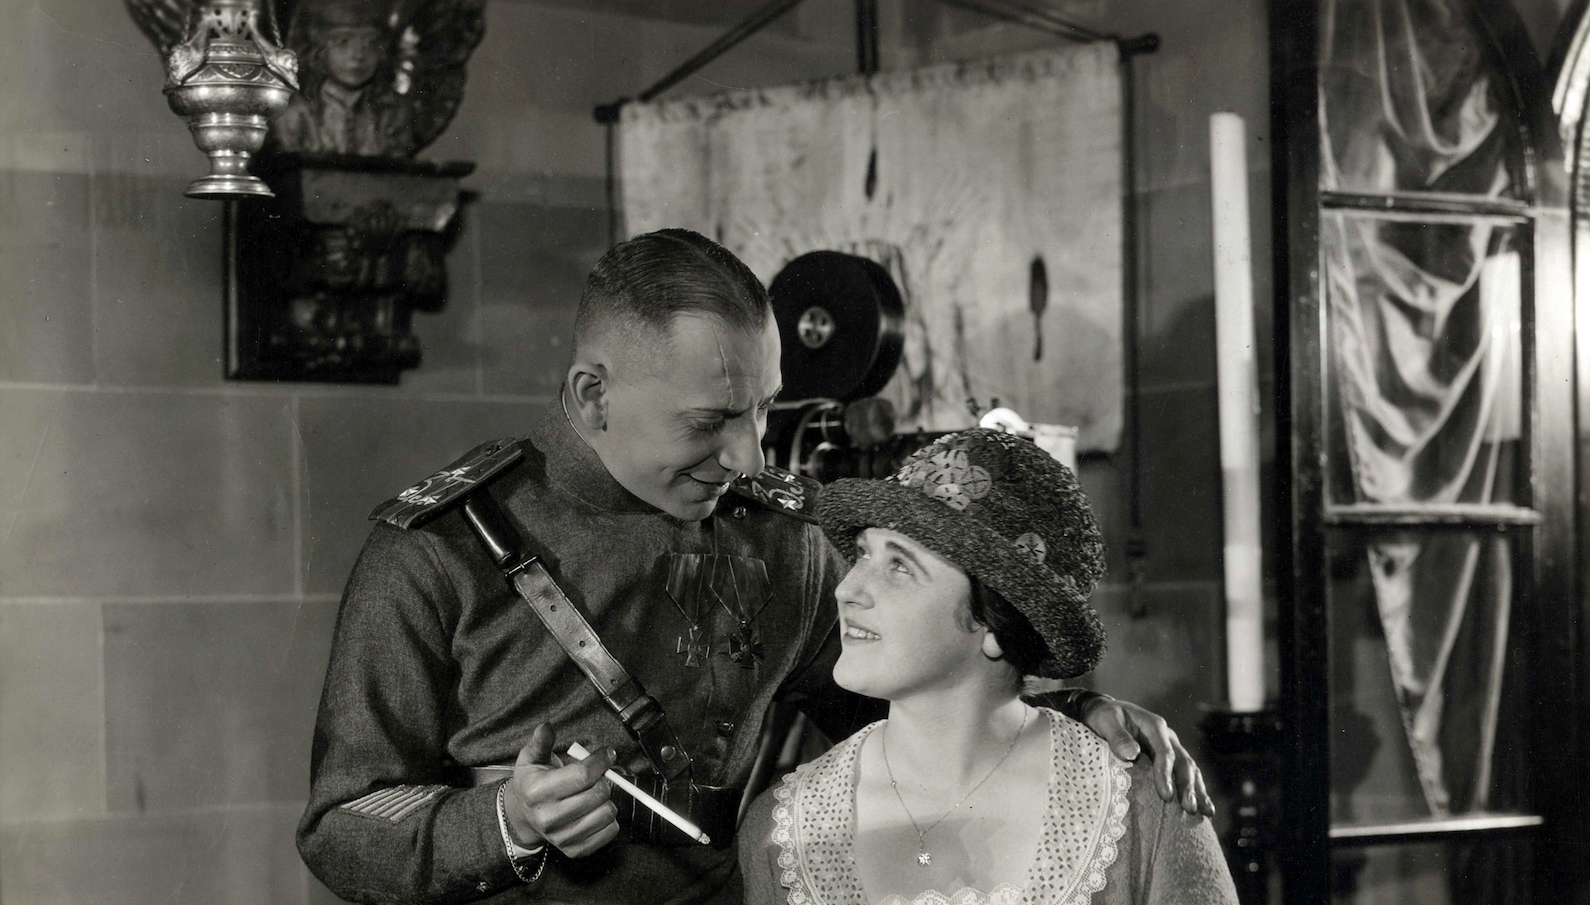 A man in military uniform holding a long cigarette looks down and smiles at a woman in a hat he stands over